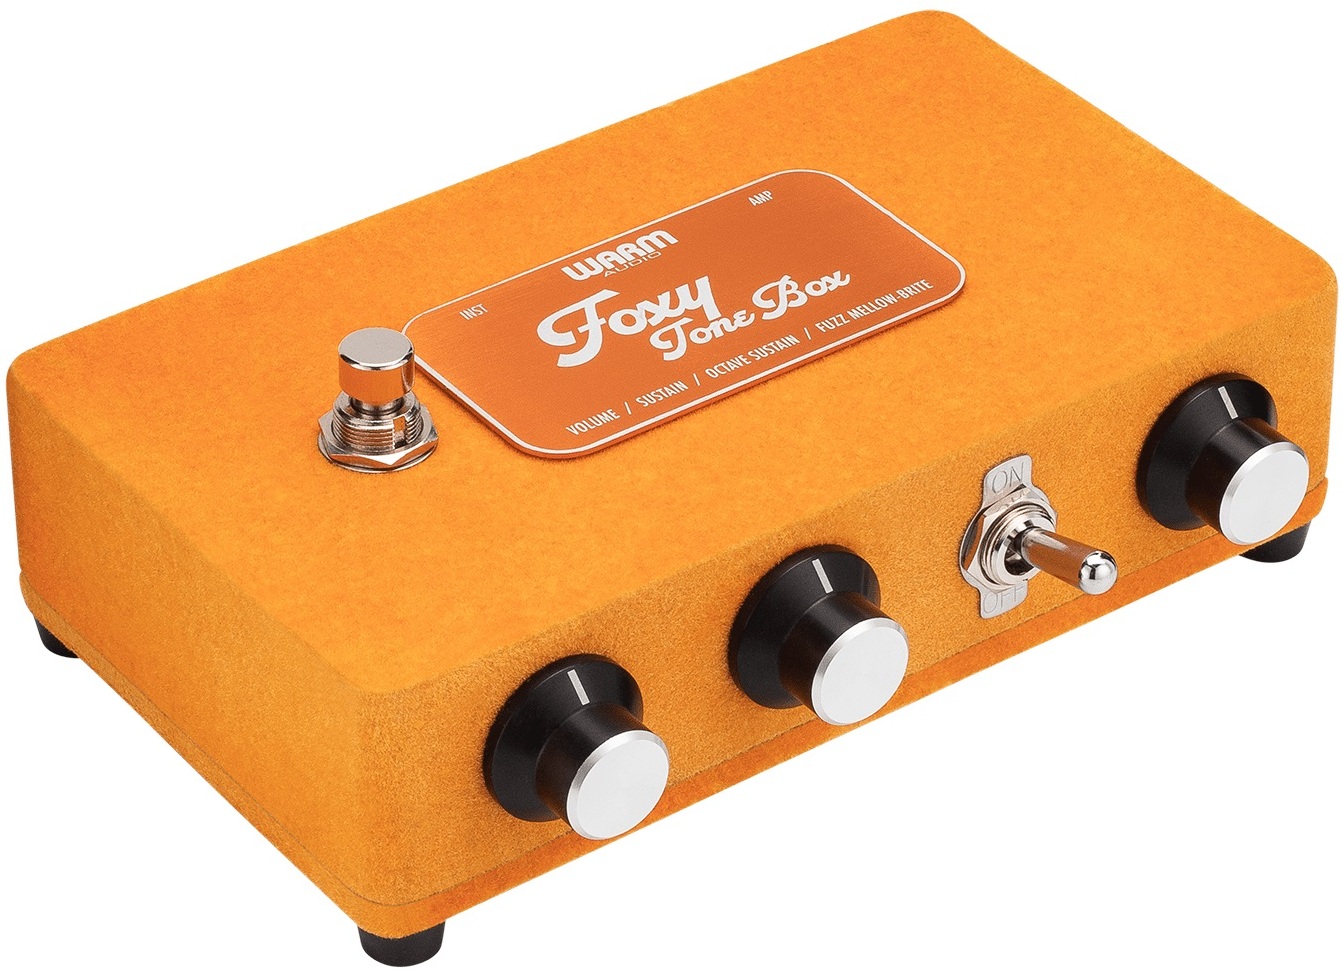 Warm Audio Foxy Tone Box - Overdrive, distortion & fuzz effect pedal - Main picture